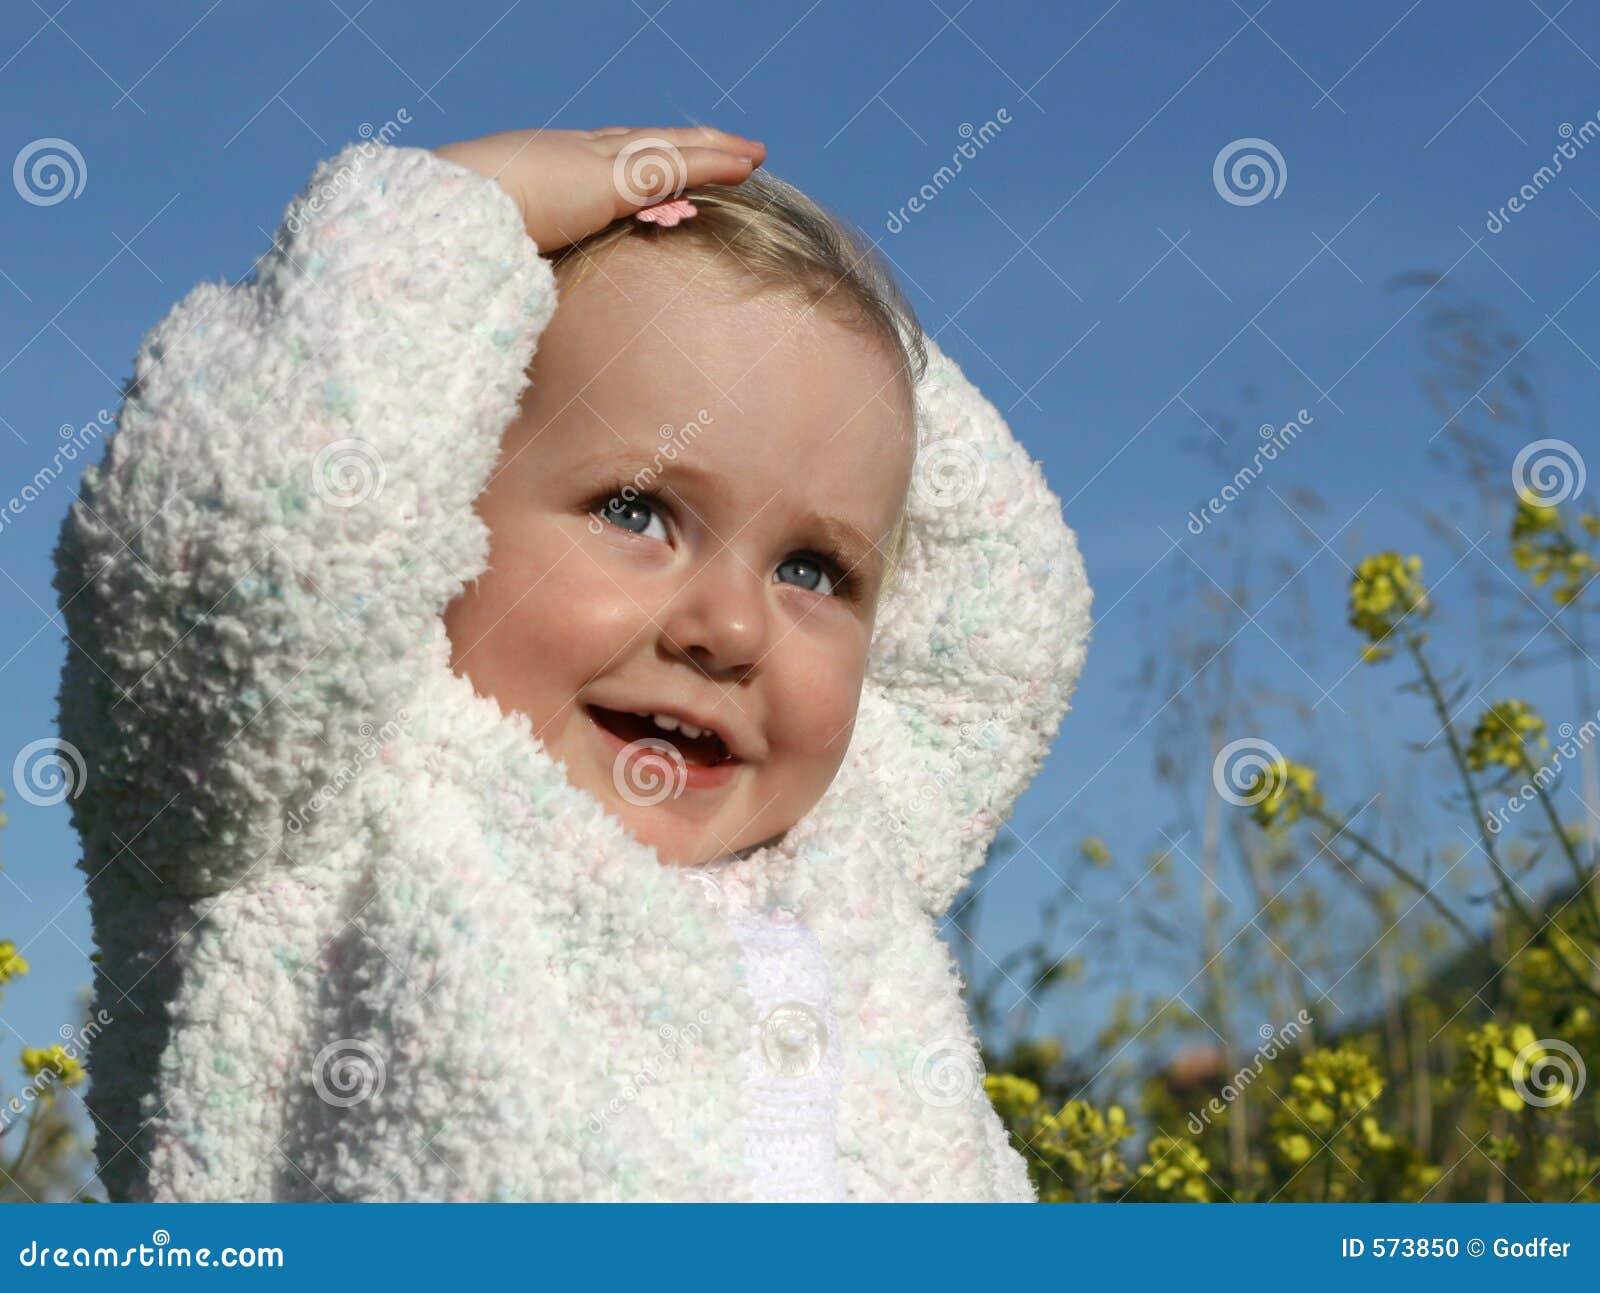 Cute toddler stock photo. Image of confident, blond ...